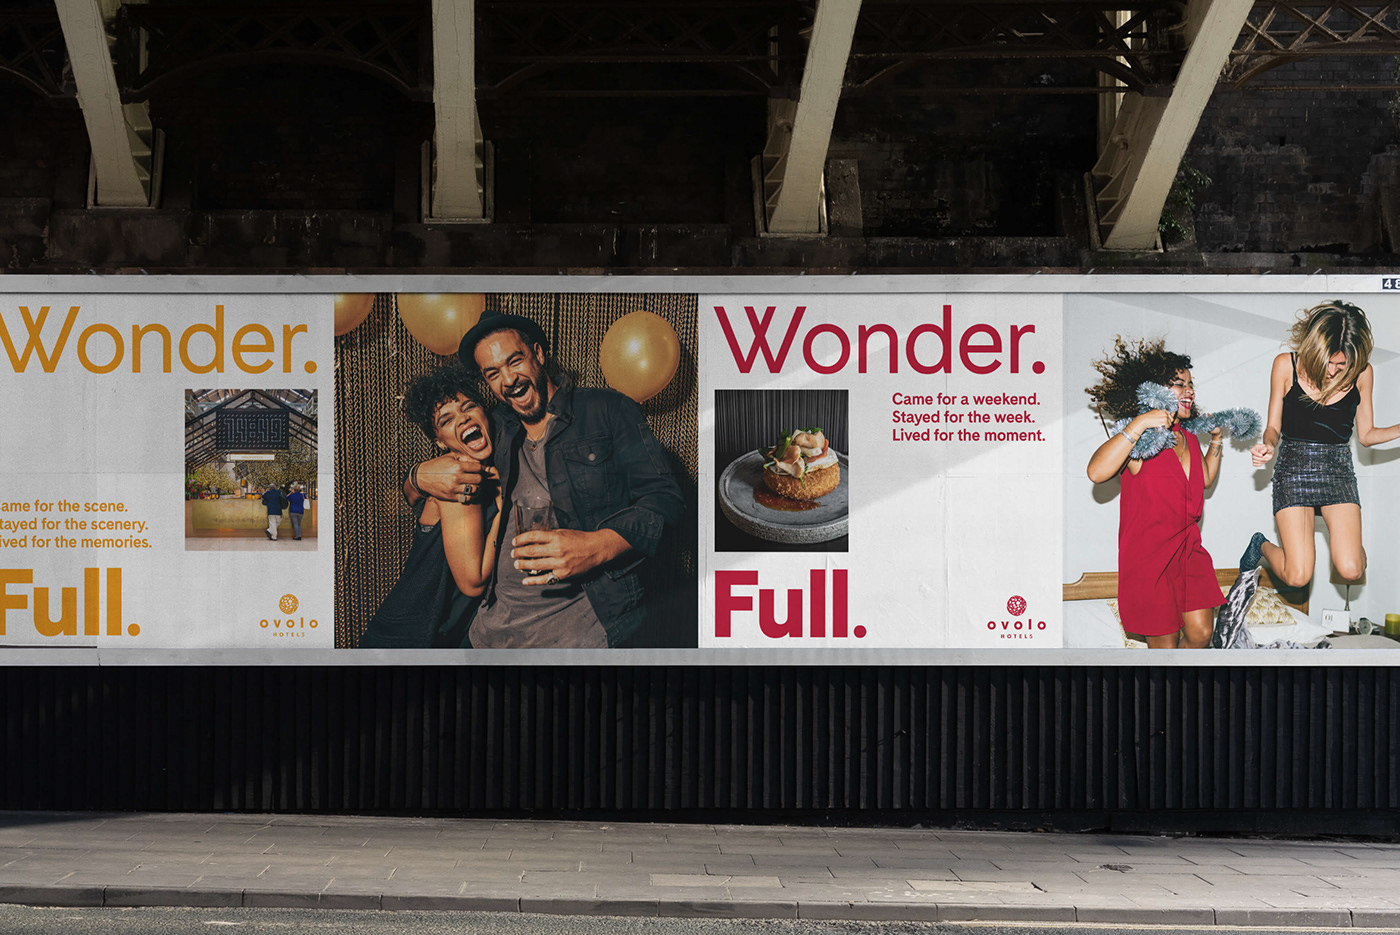 Ovolo Hotels Wonder. Full. Brand Campaign Advertising Hoarding